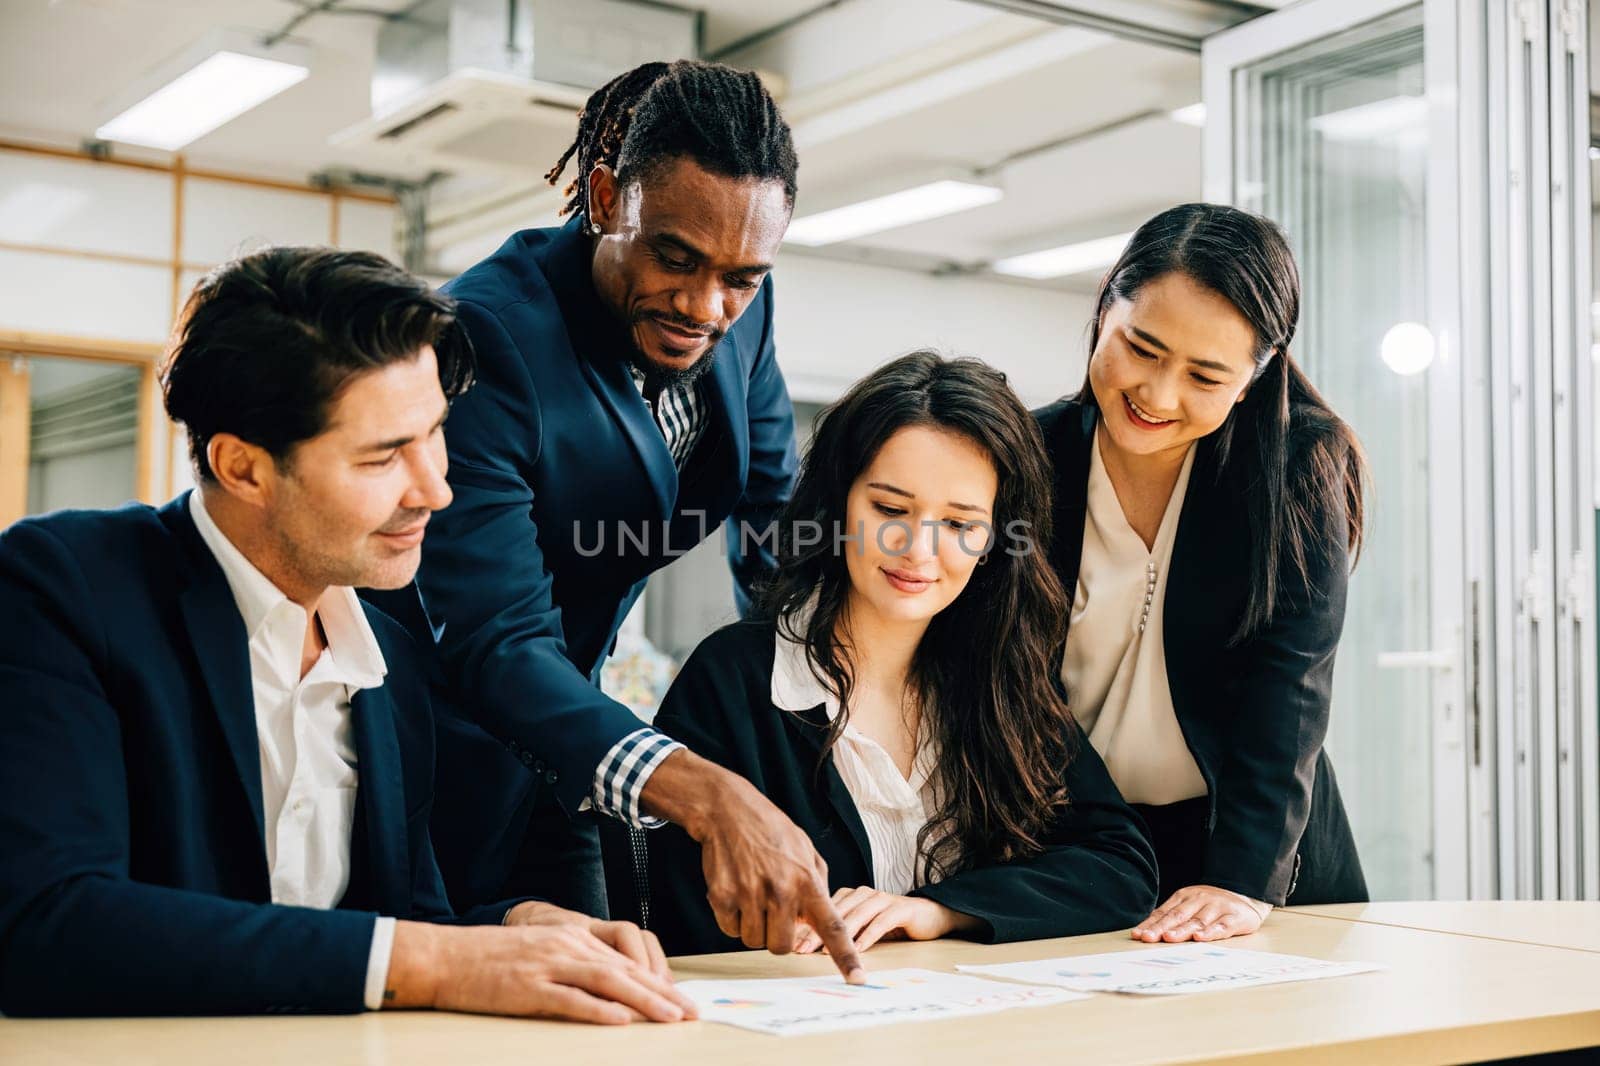 A global team, with a female leader, collaborates in a meeting room. Their teamwork is evident as they discuss financial results, share ideas, and brainstorm strategies for success.